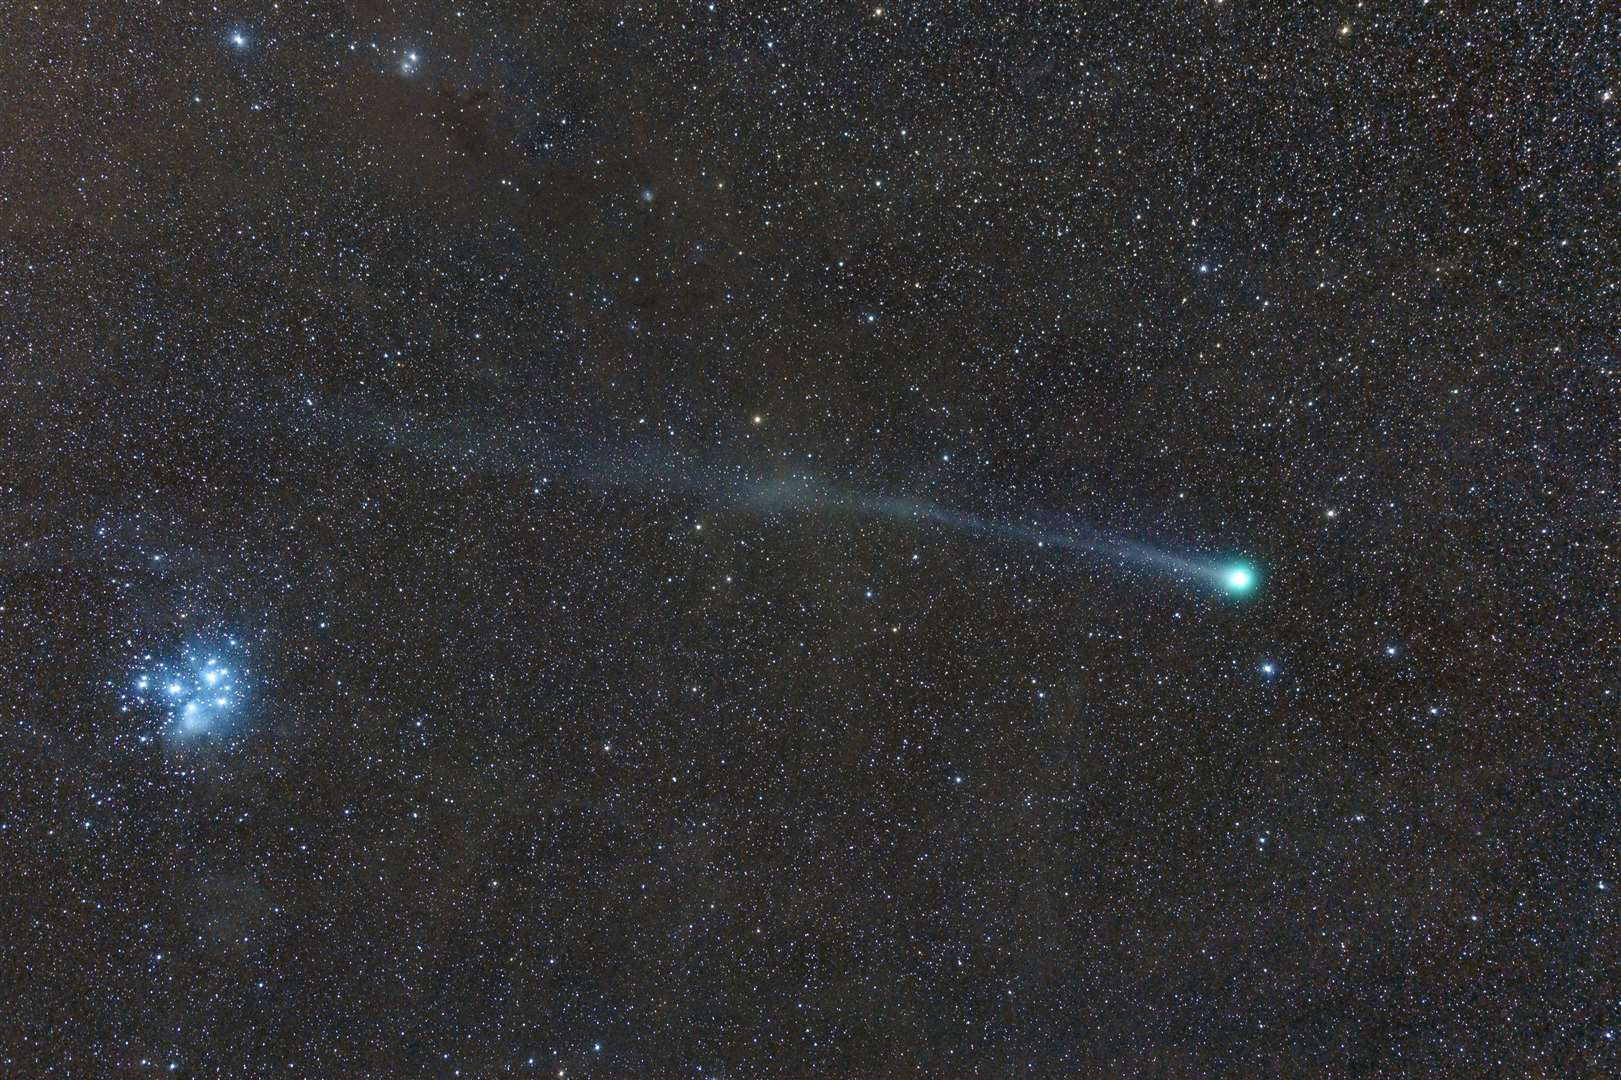 The comet hasn’t been seen for more than 70 years. Image: iStock.